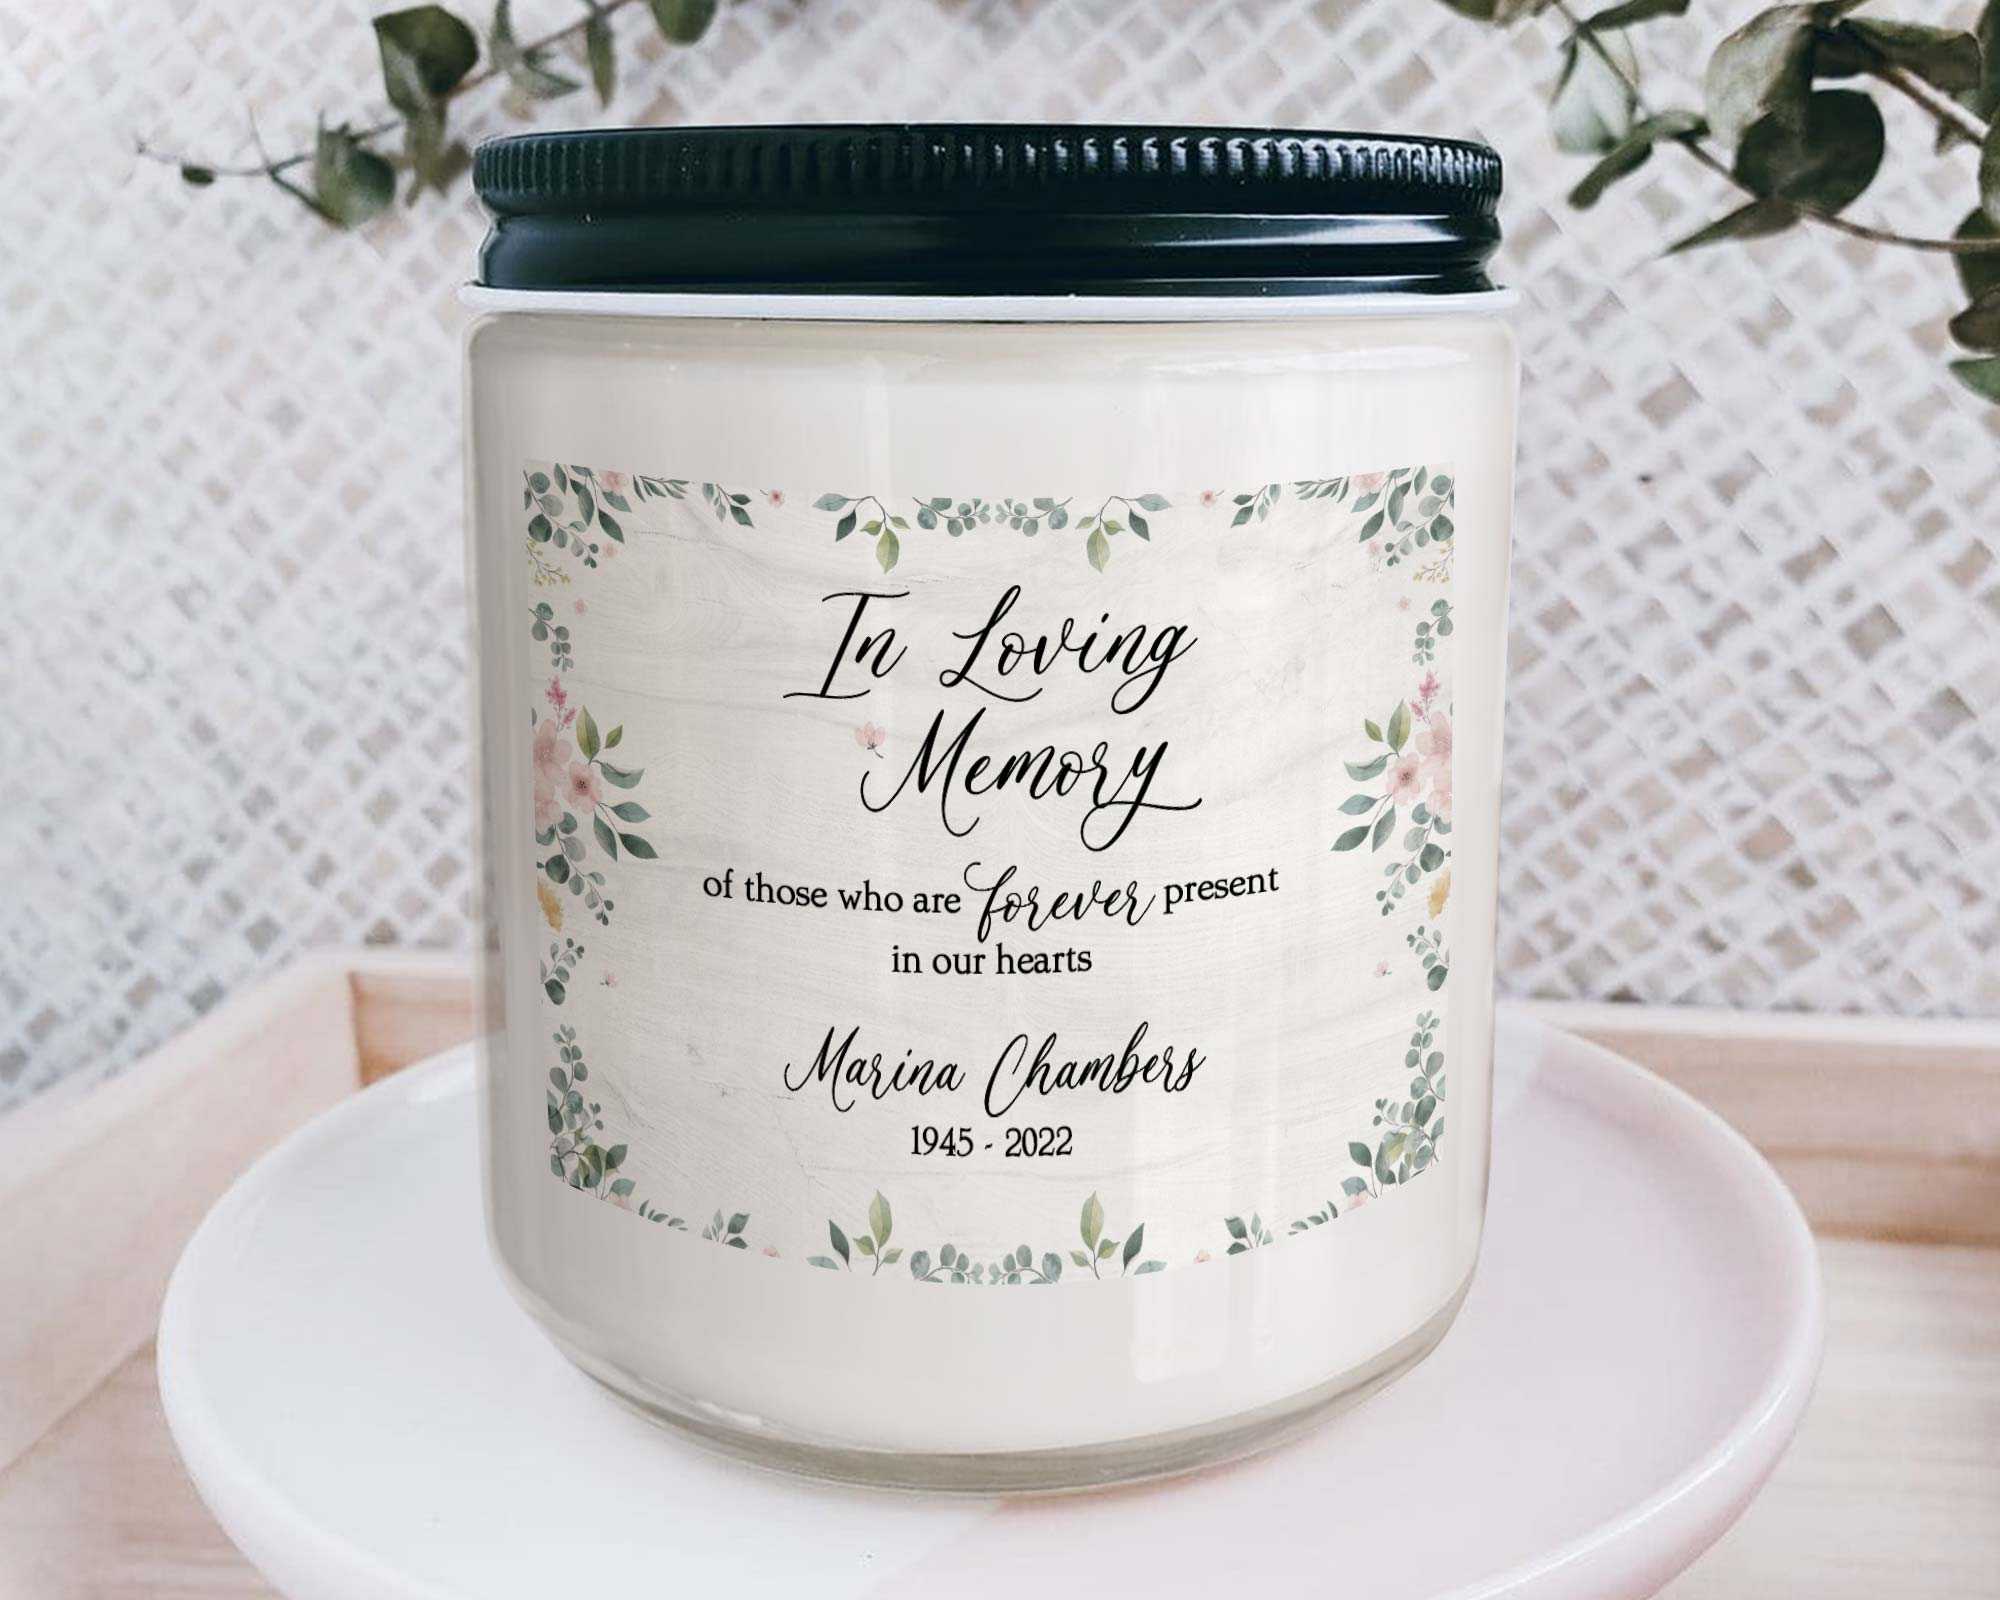 Personalized Memorial Candle For Loss Of Mother, Sympathy Candle For Mother's Day, Remembrance Candle